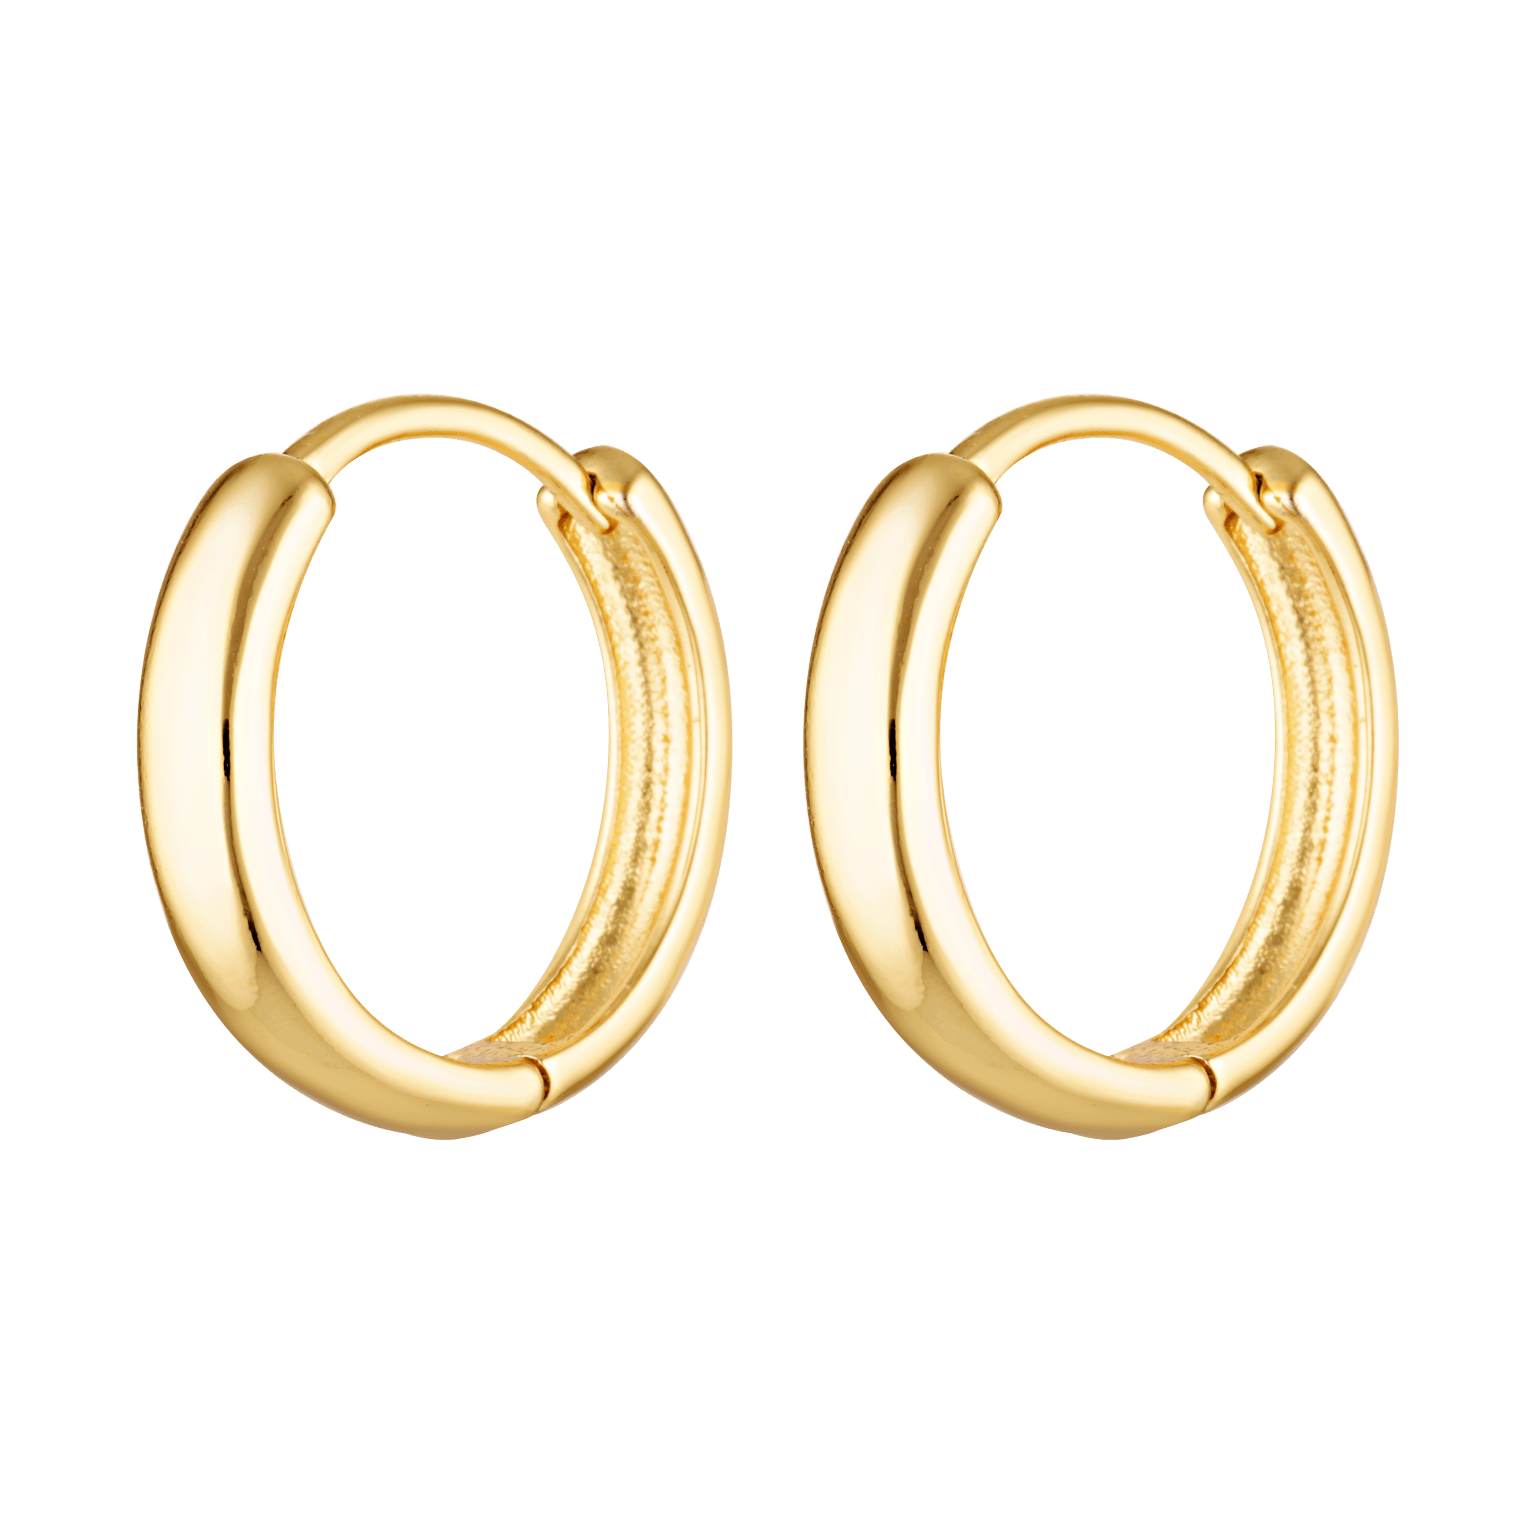 Everyday small gold hoops